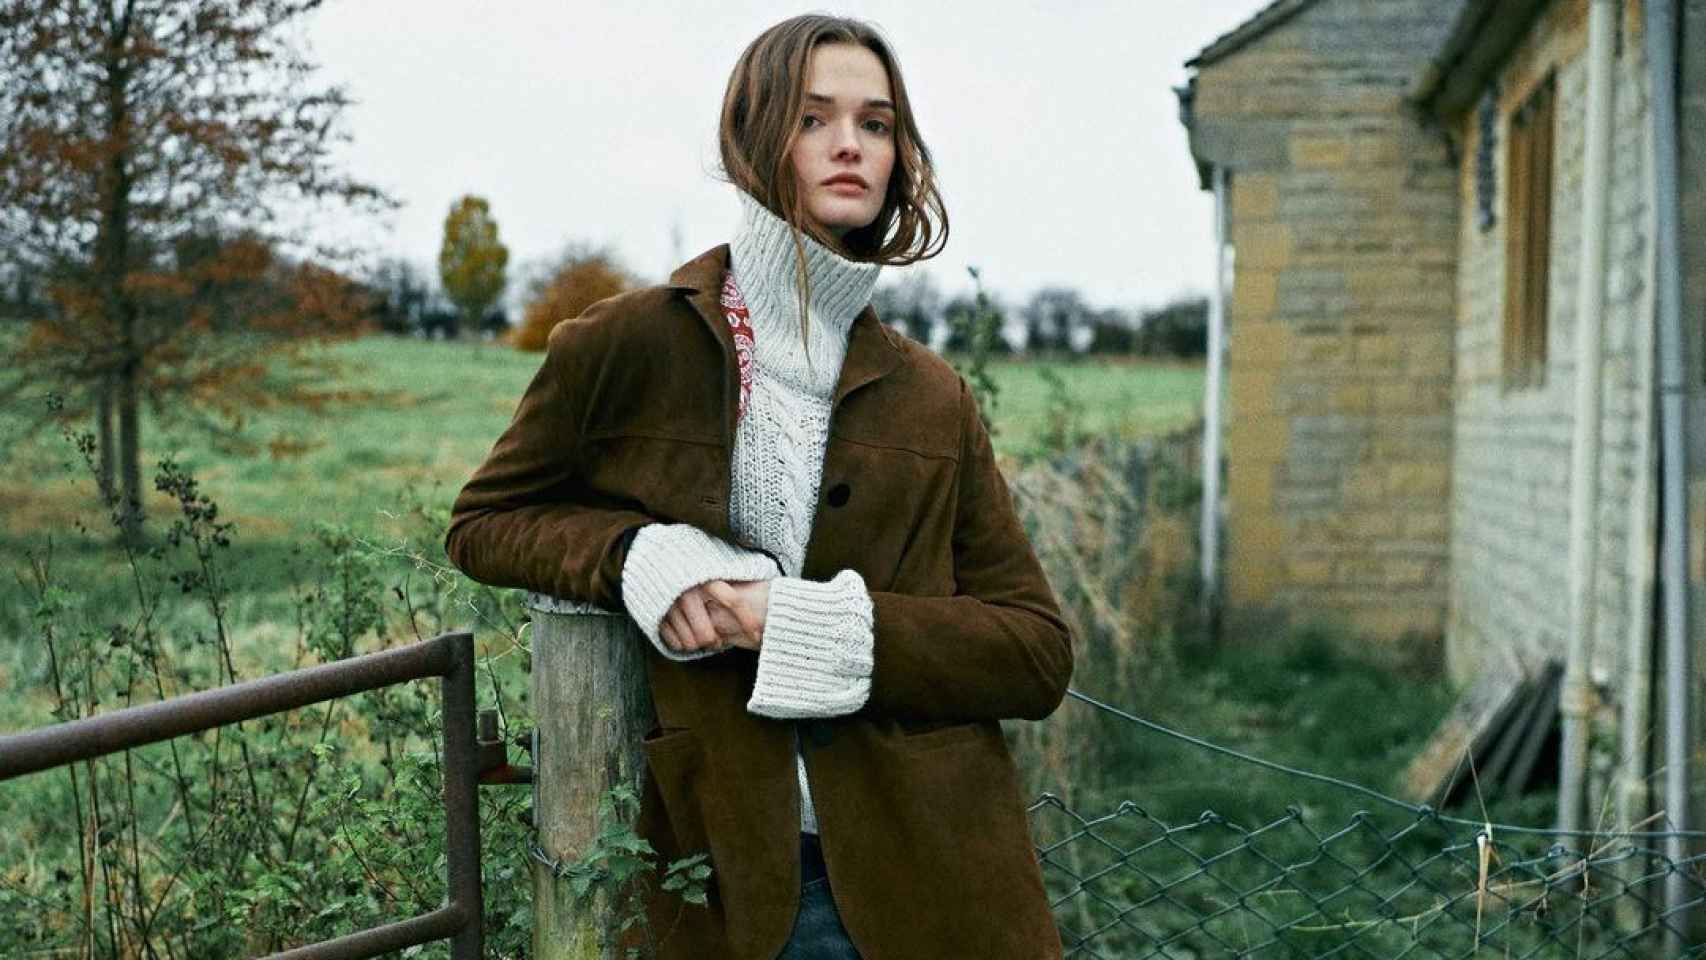 COTSWOLDS+-+Where+rolling+hills+meet+quaint+villages+a+very+British+holiday+scene+unfolds.+The+New+Collection+is+available+in+stores+and+massimodutti.com#MassimoDutti+#NewinDuttiPhotography-+@edmartinstud